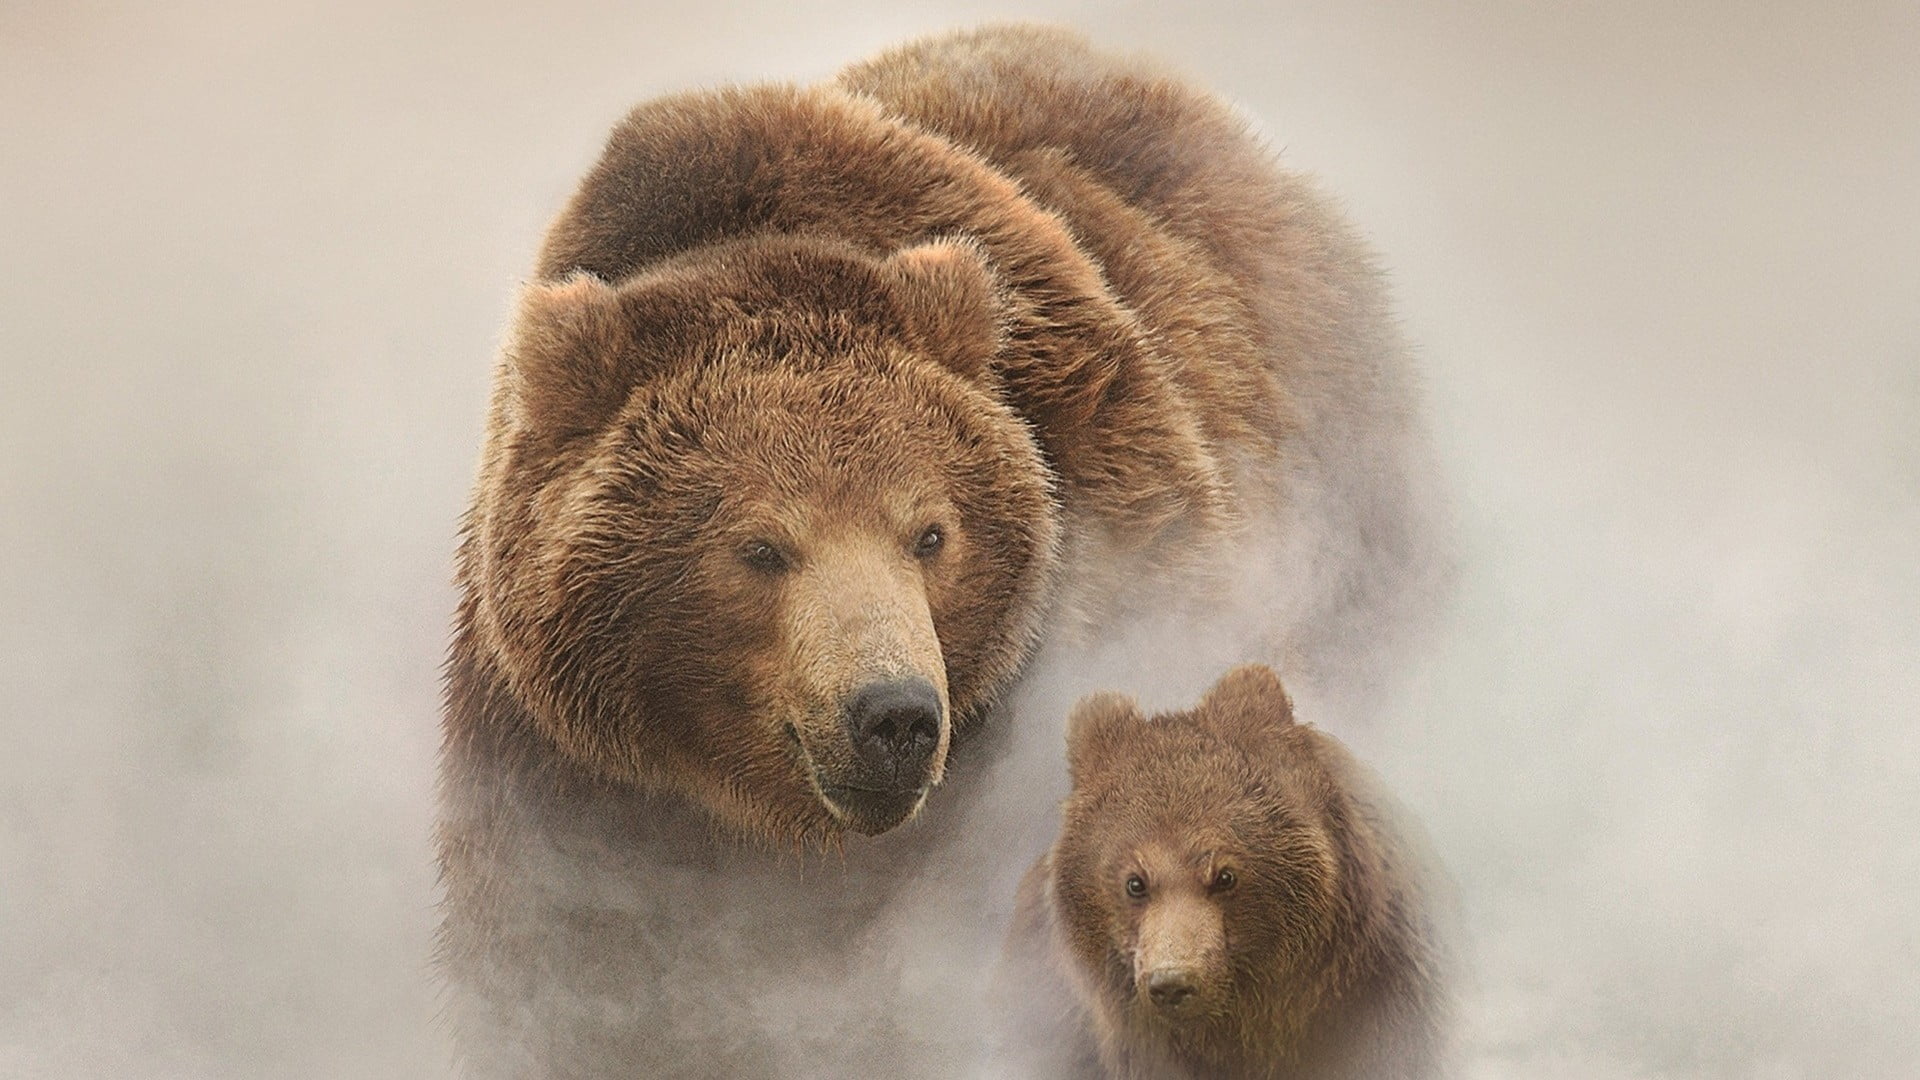 two brown bears, Russia, snow, Land of Bears, filmed in Russia